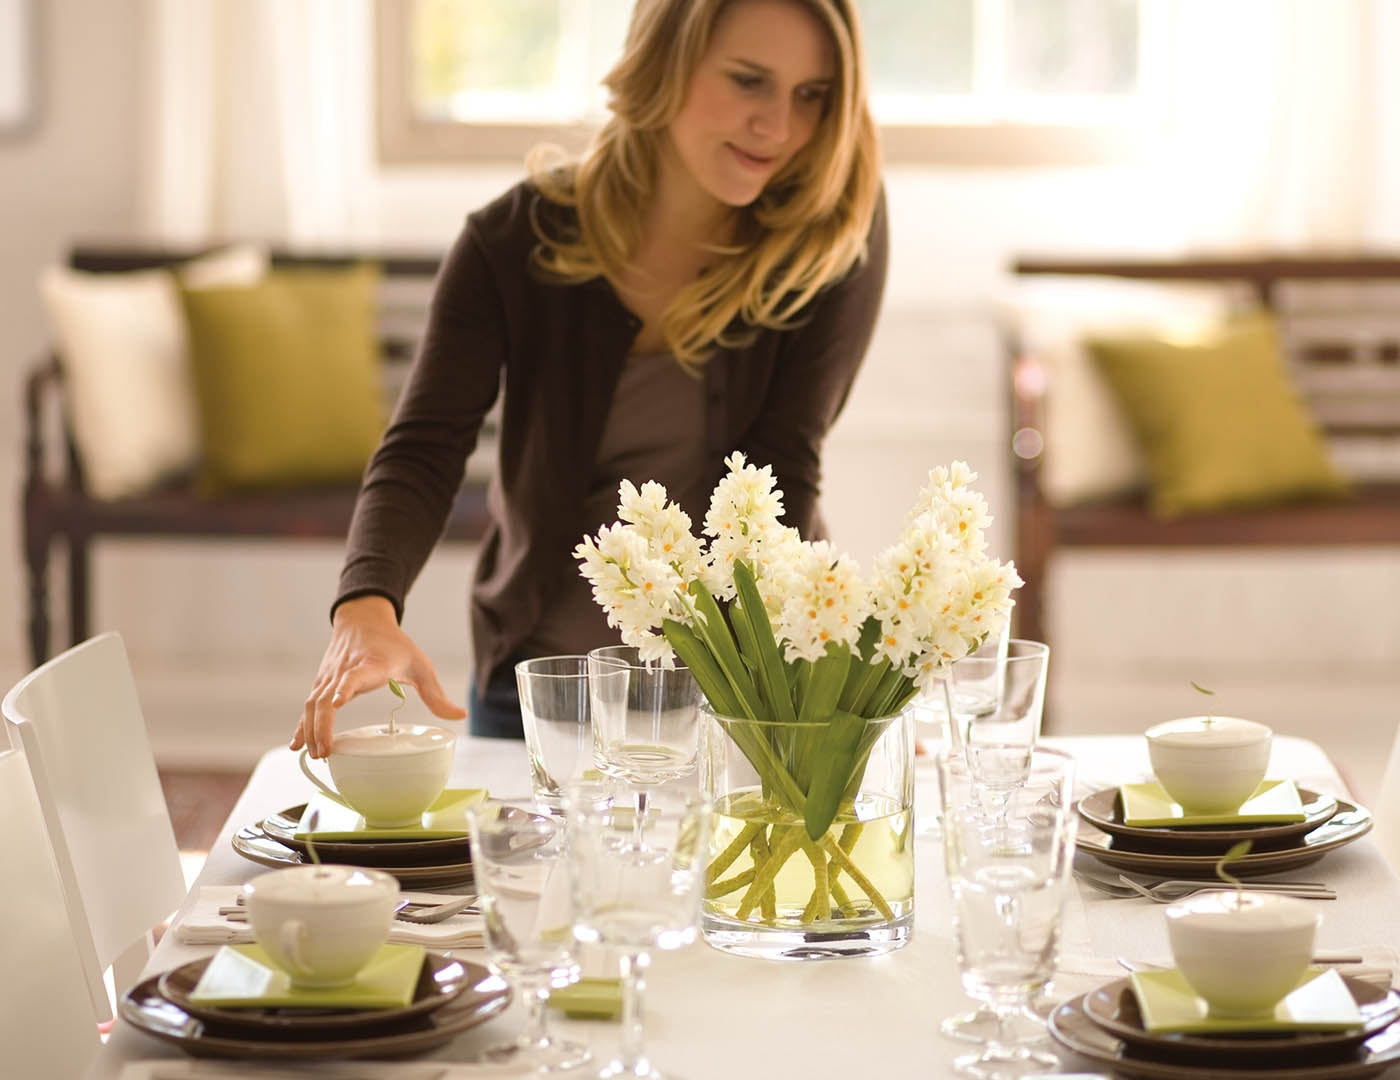 Setting the dining table with Café Cups, glasses, flowers